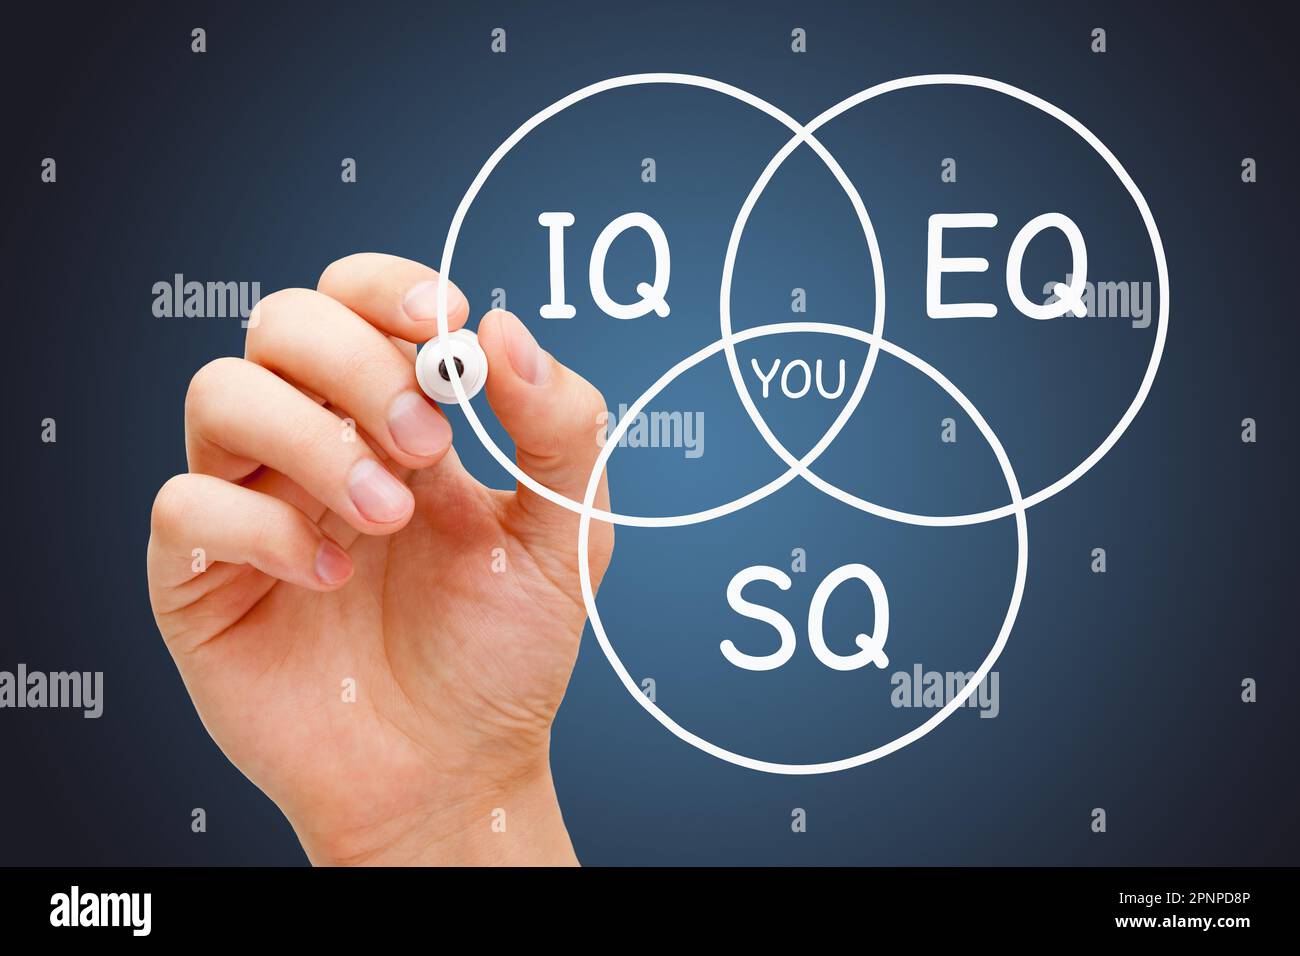 Hand drawing diagram concept about IQ intelligence quotient, EQ emotional intelligence and SQ spiritual or social quotient. Stock Photo